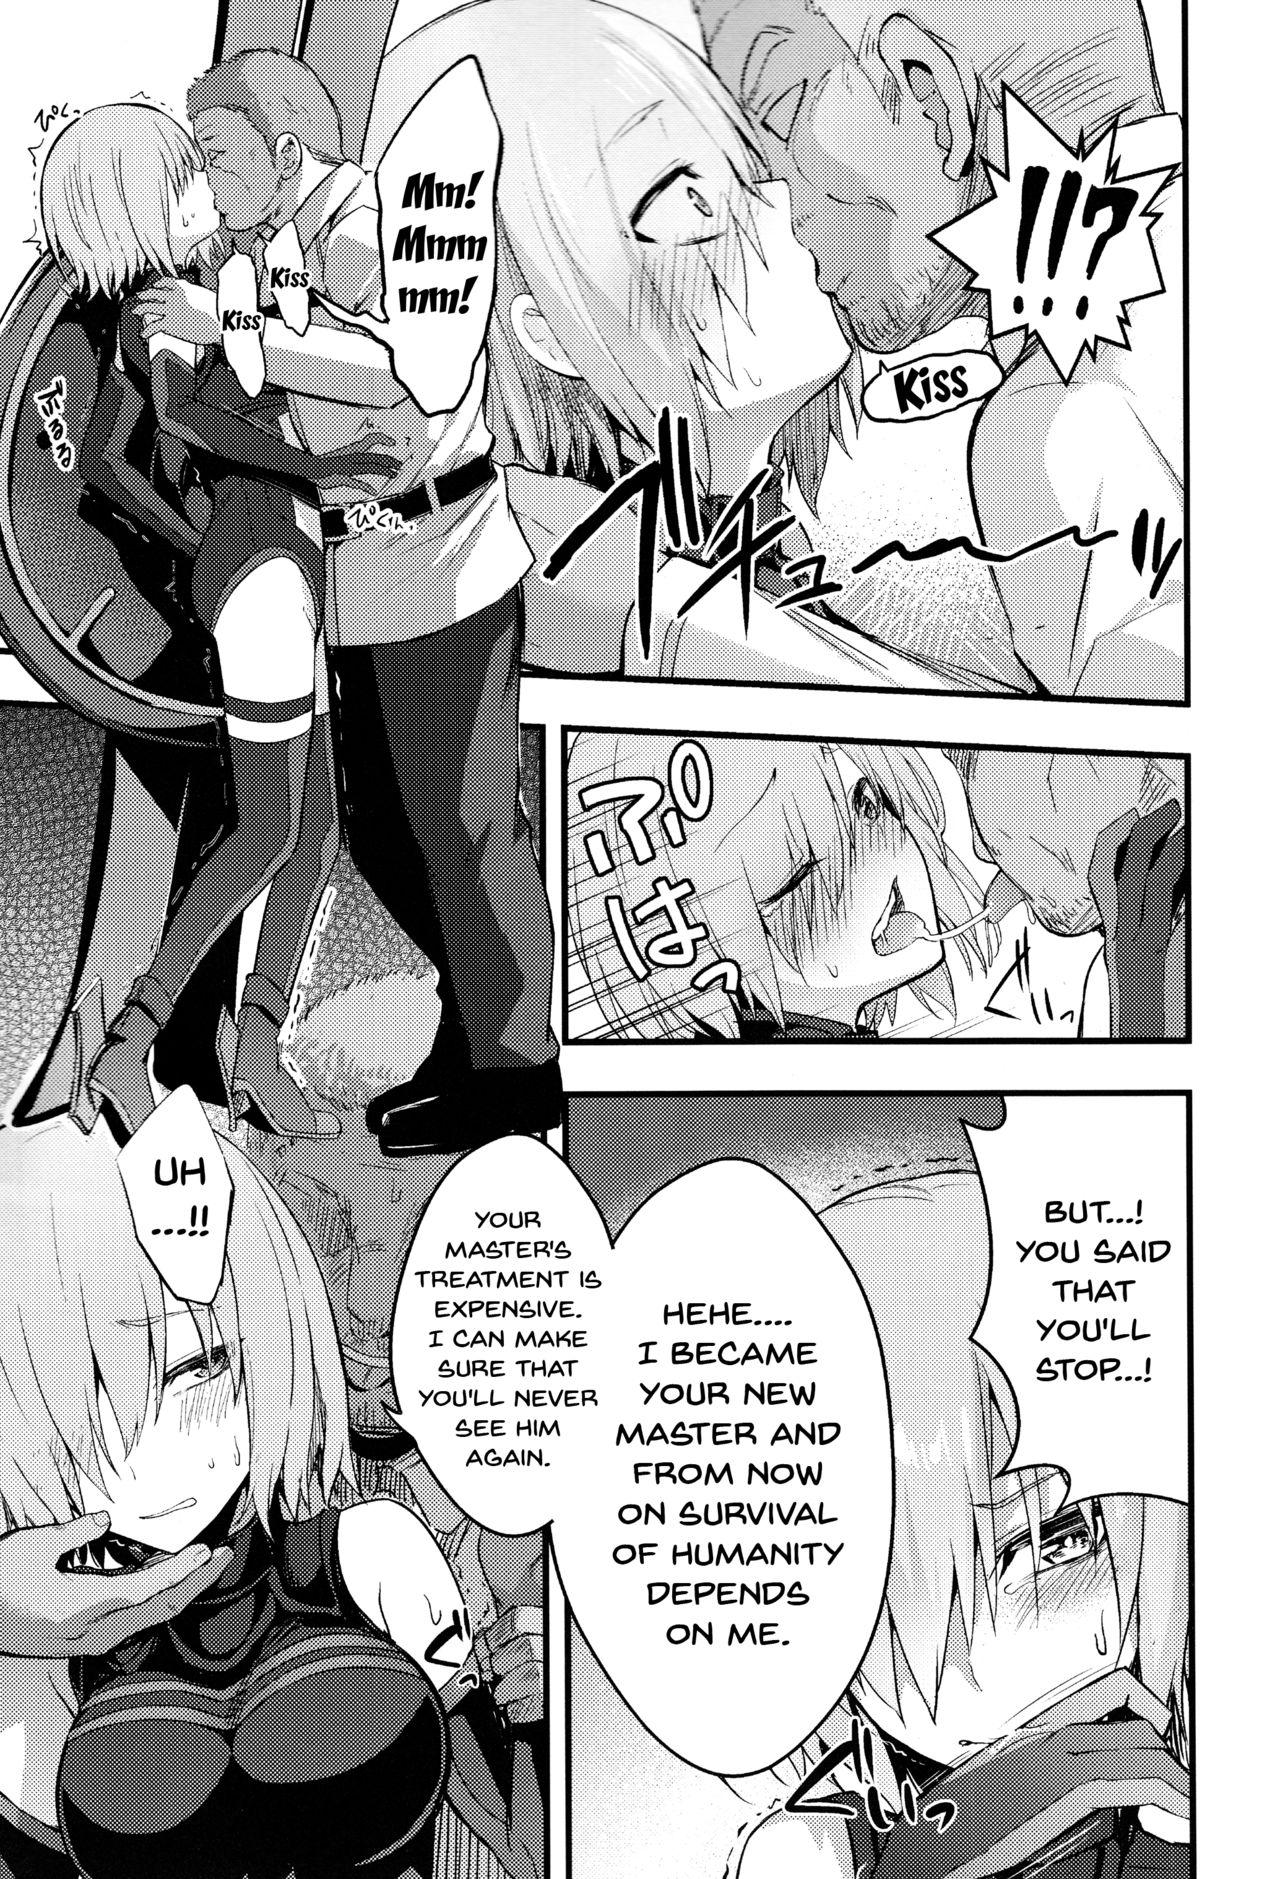 Pussysex Senpai no Inai Tokuiten - Fate grand order Doggy Style Porn - Page 10